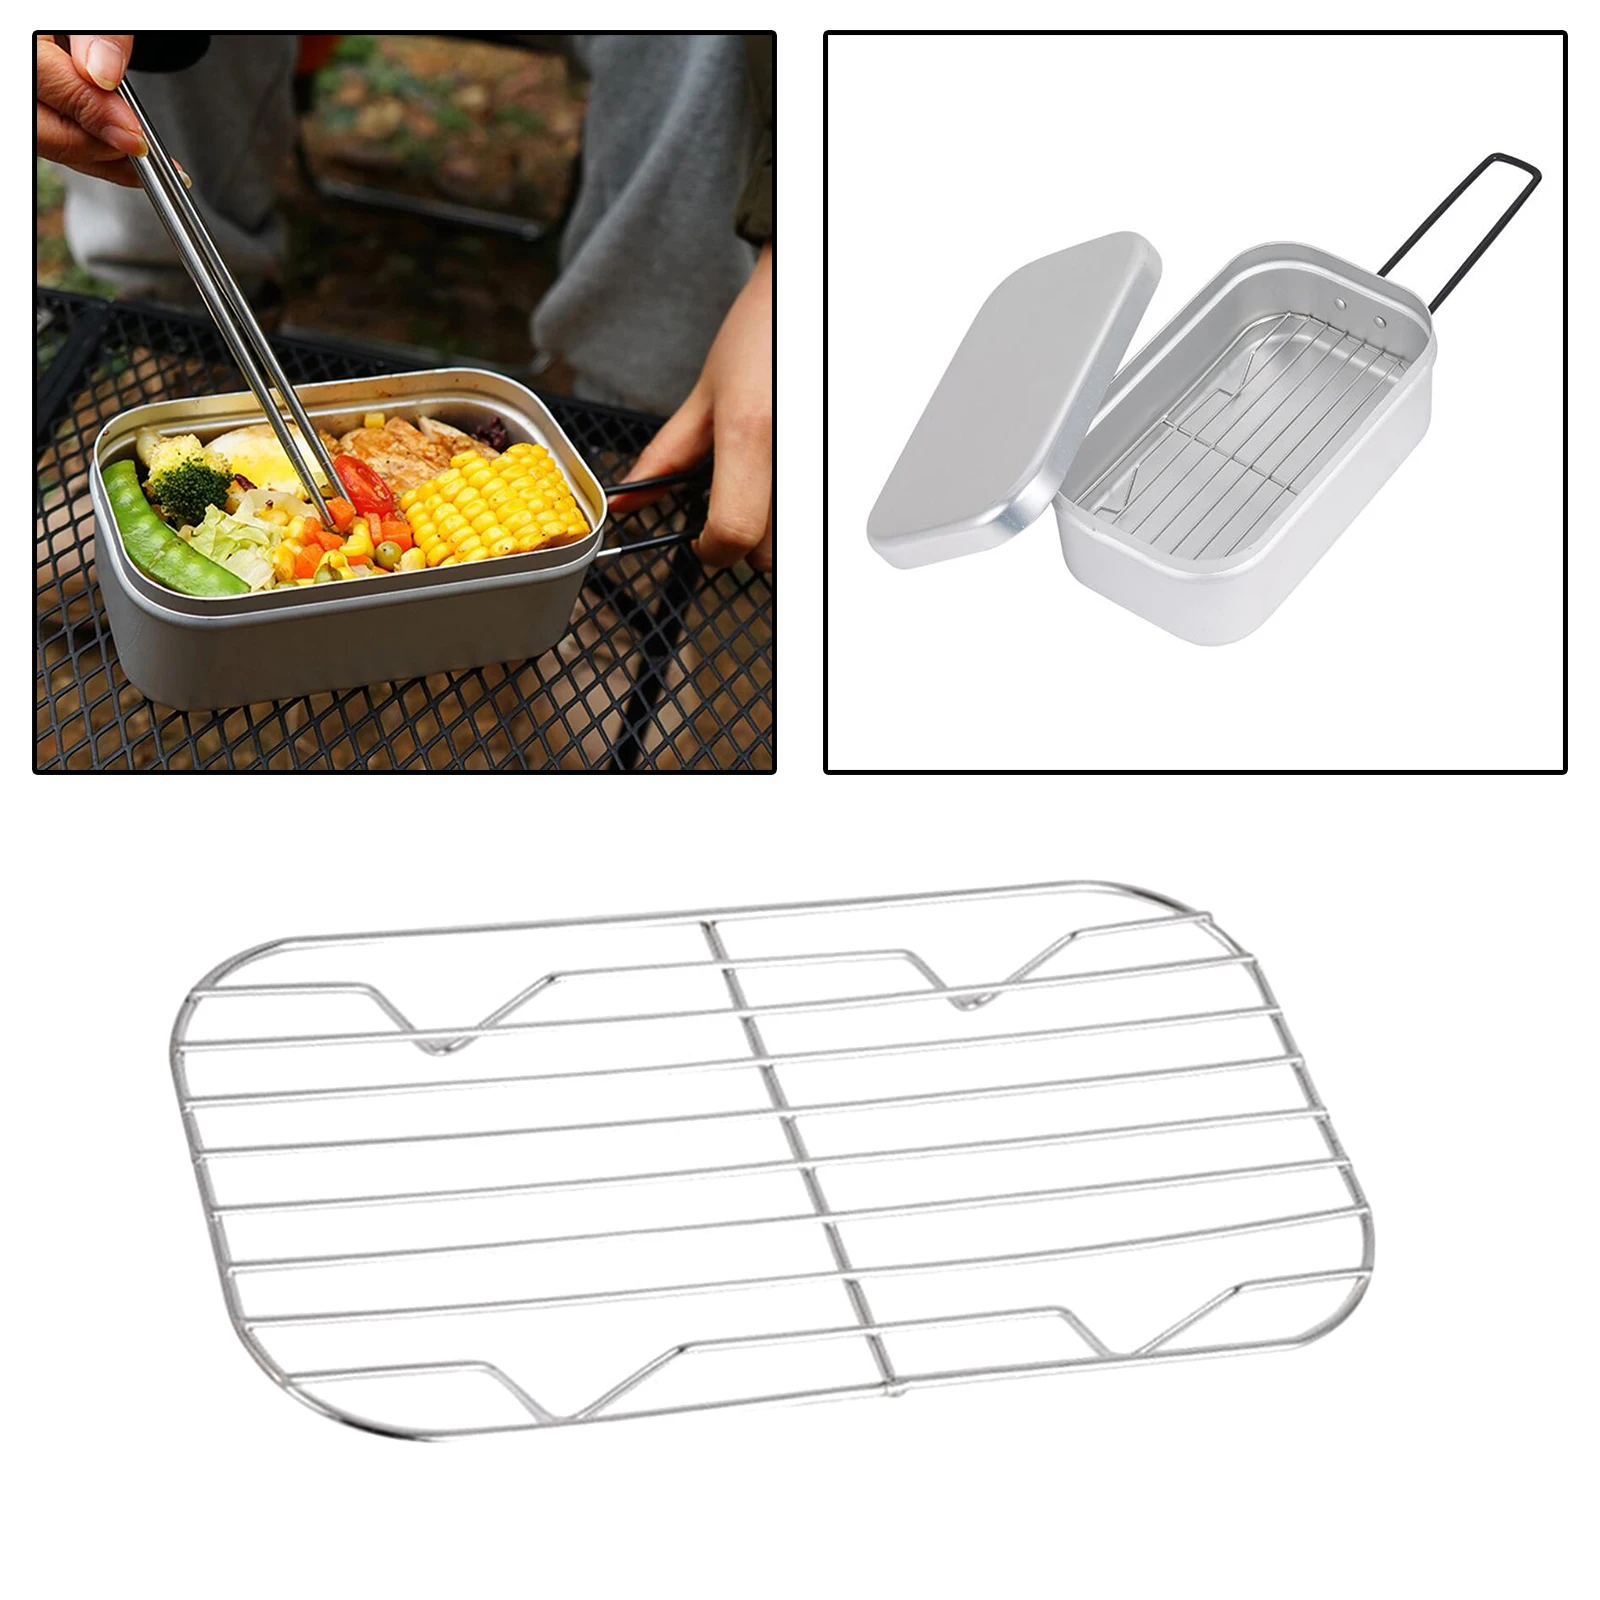 Outdoor Bento Lunch Box Steaming Rack Food Container w/ Foldable Handle for Camping BBQ Picnic Office Travel Cooking Cookware